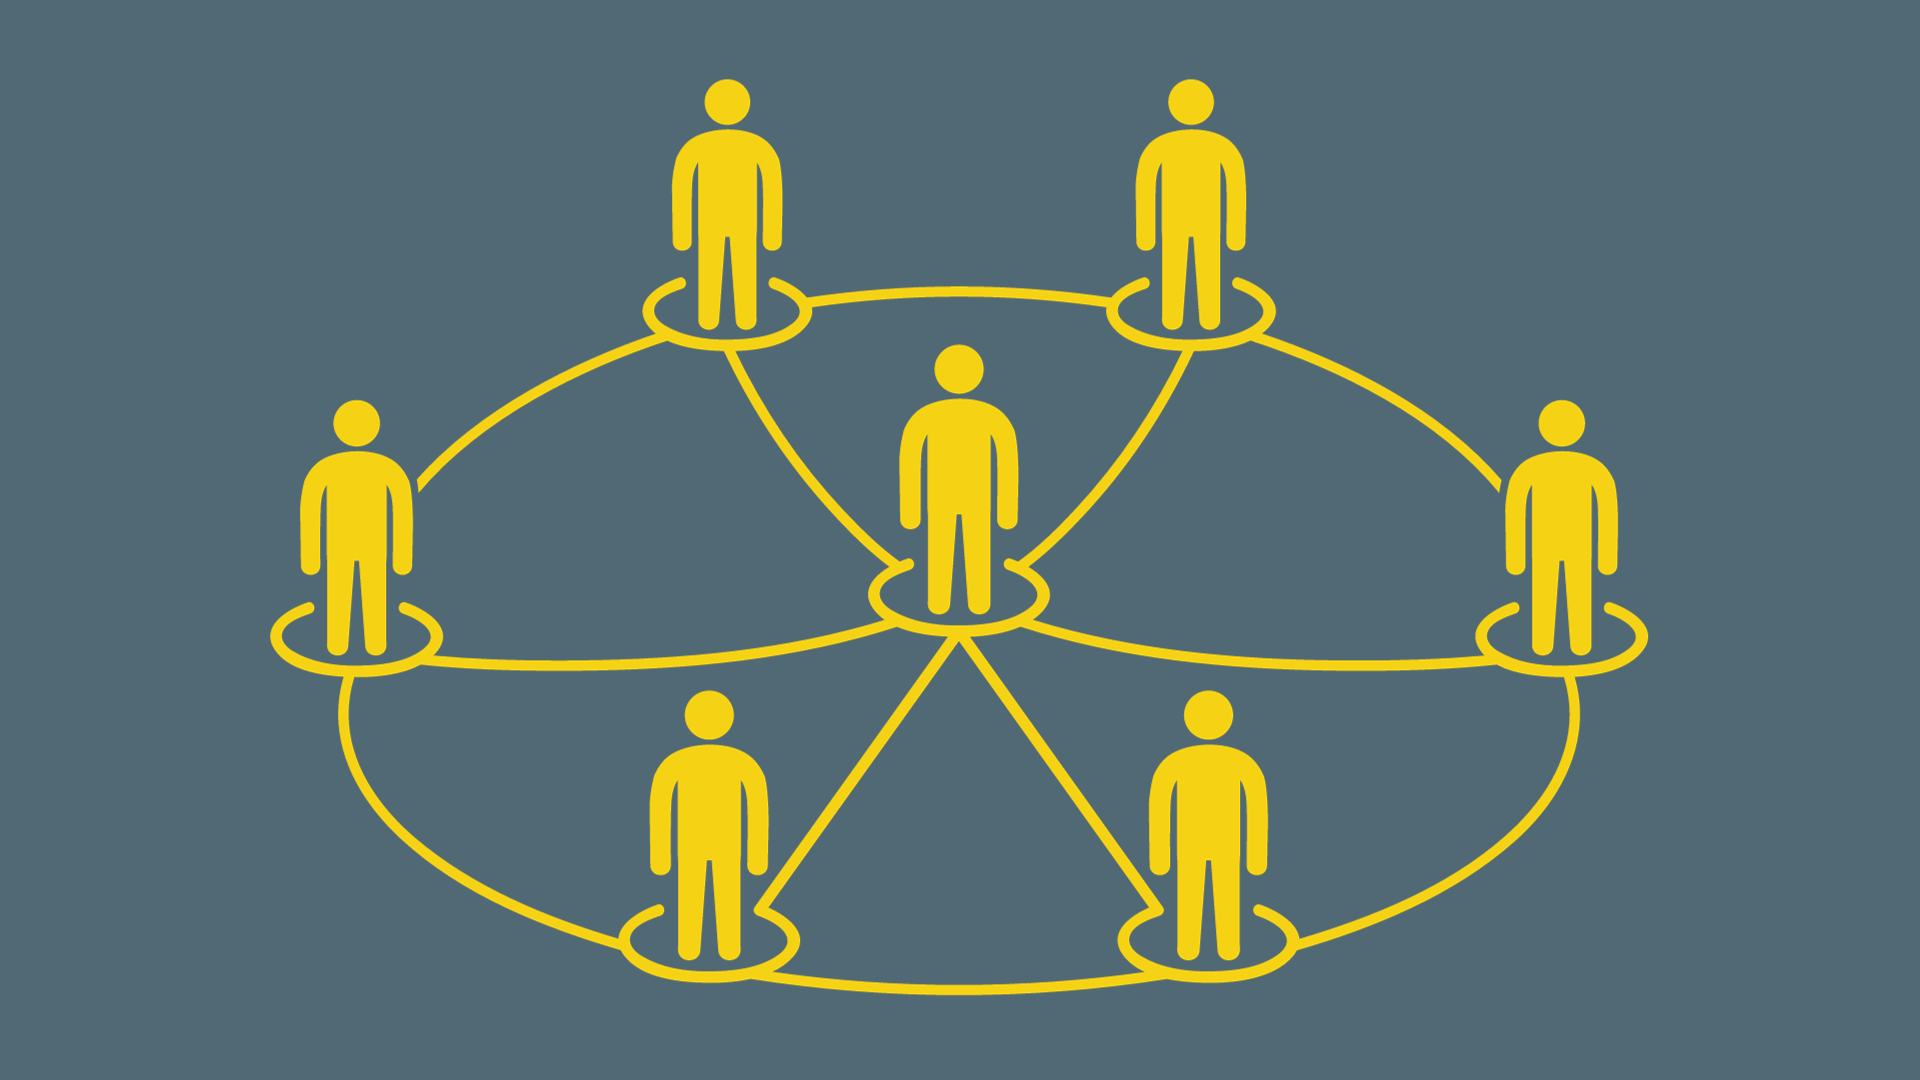 A image of a people network with 9 people icons all linked together to show a connected network